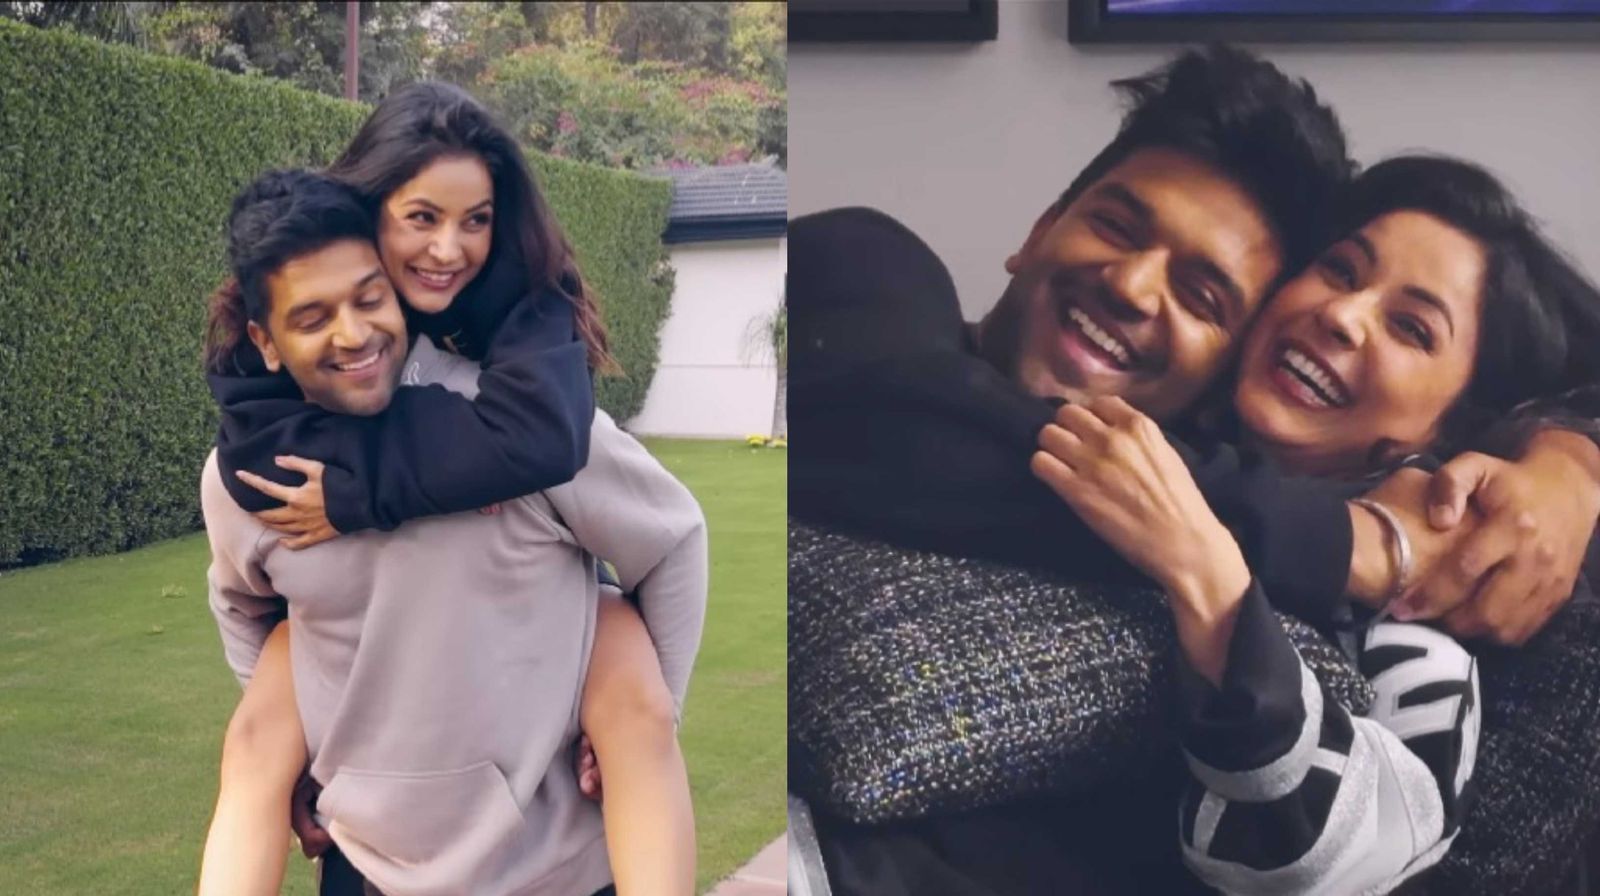 Shehnaaz Gill & Guru Randhawa’s chemistry in Sunrise leaves fans wondering if this is a vlog from their personal life